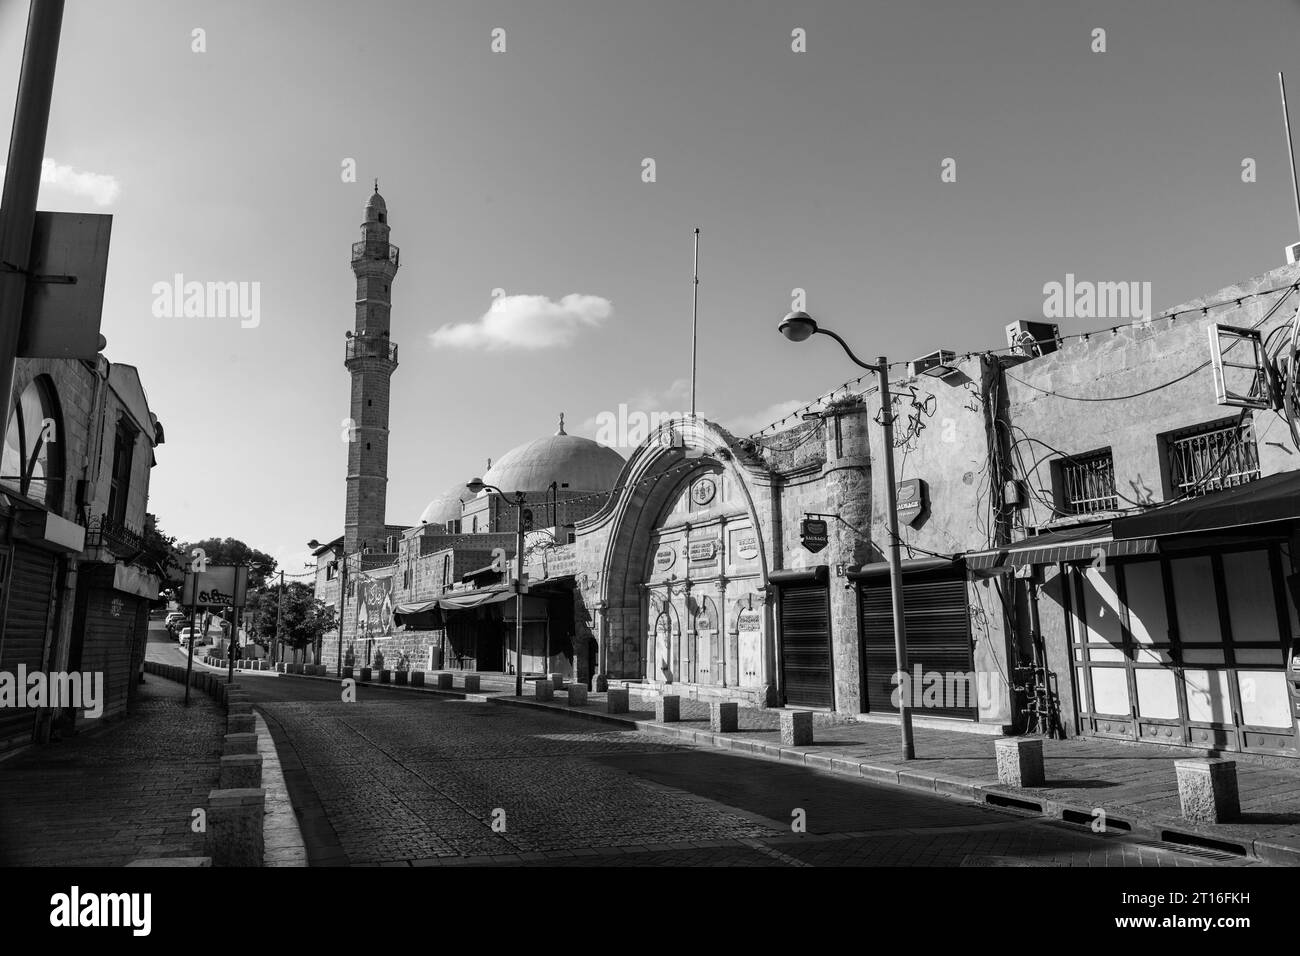 Jaffa, Israel - October 10, 2023: The Mahmoudiya Mosque is the largest and most significant mosque in Jaffa, now part of the larger city of Tel Aviv-Y Stock Photo